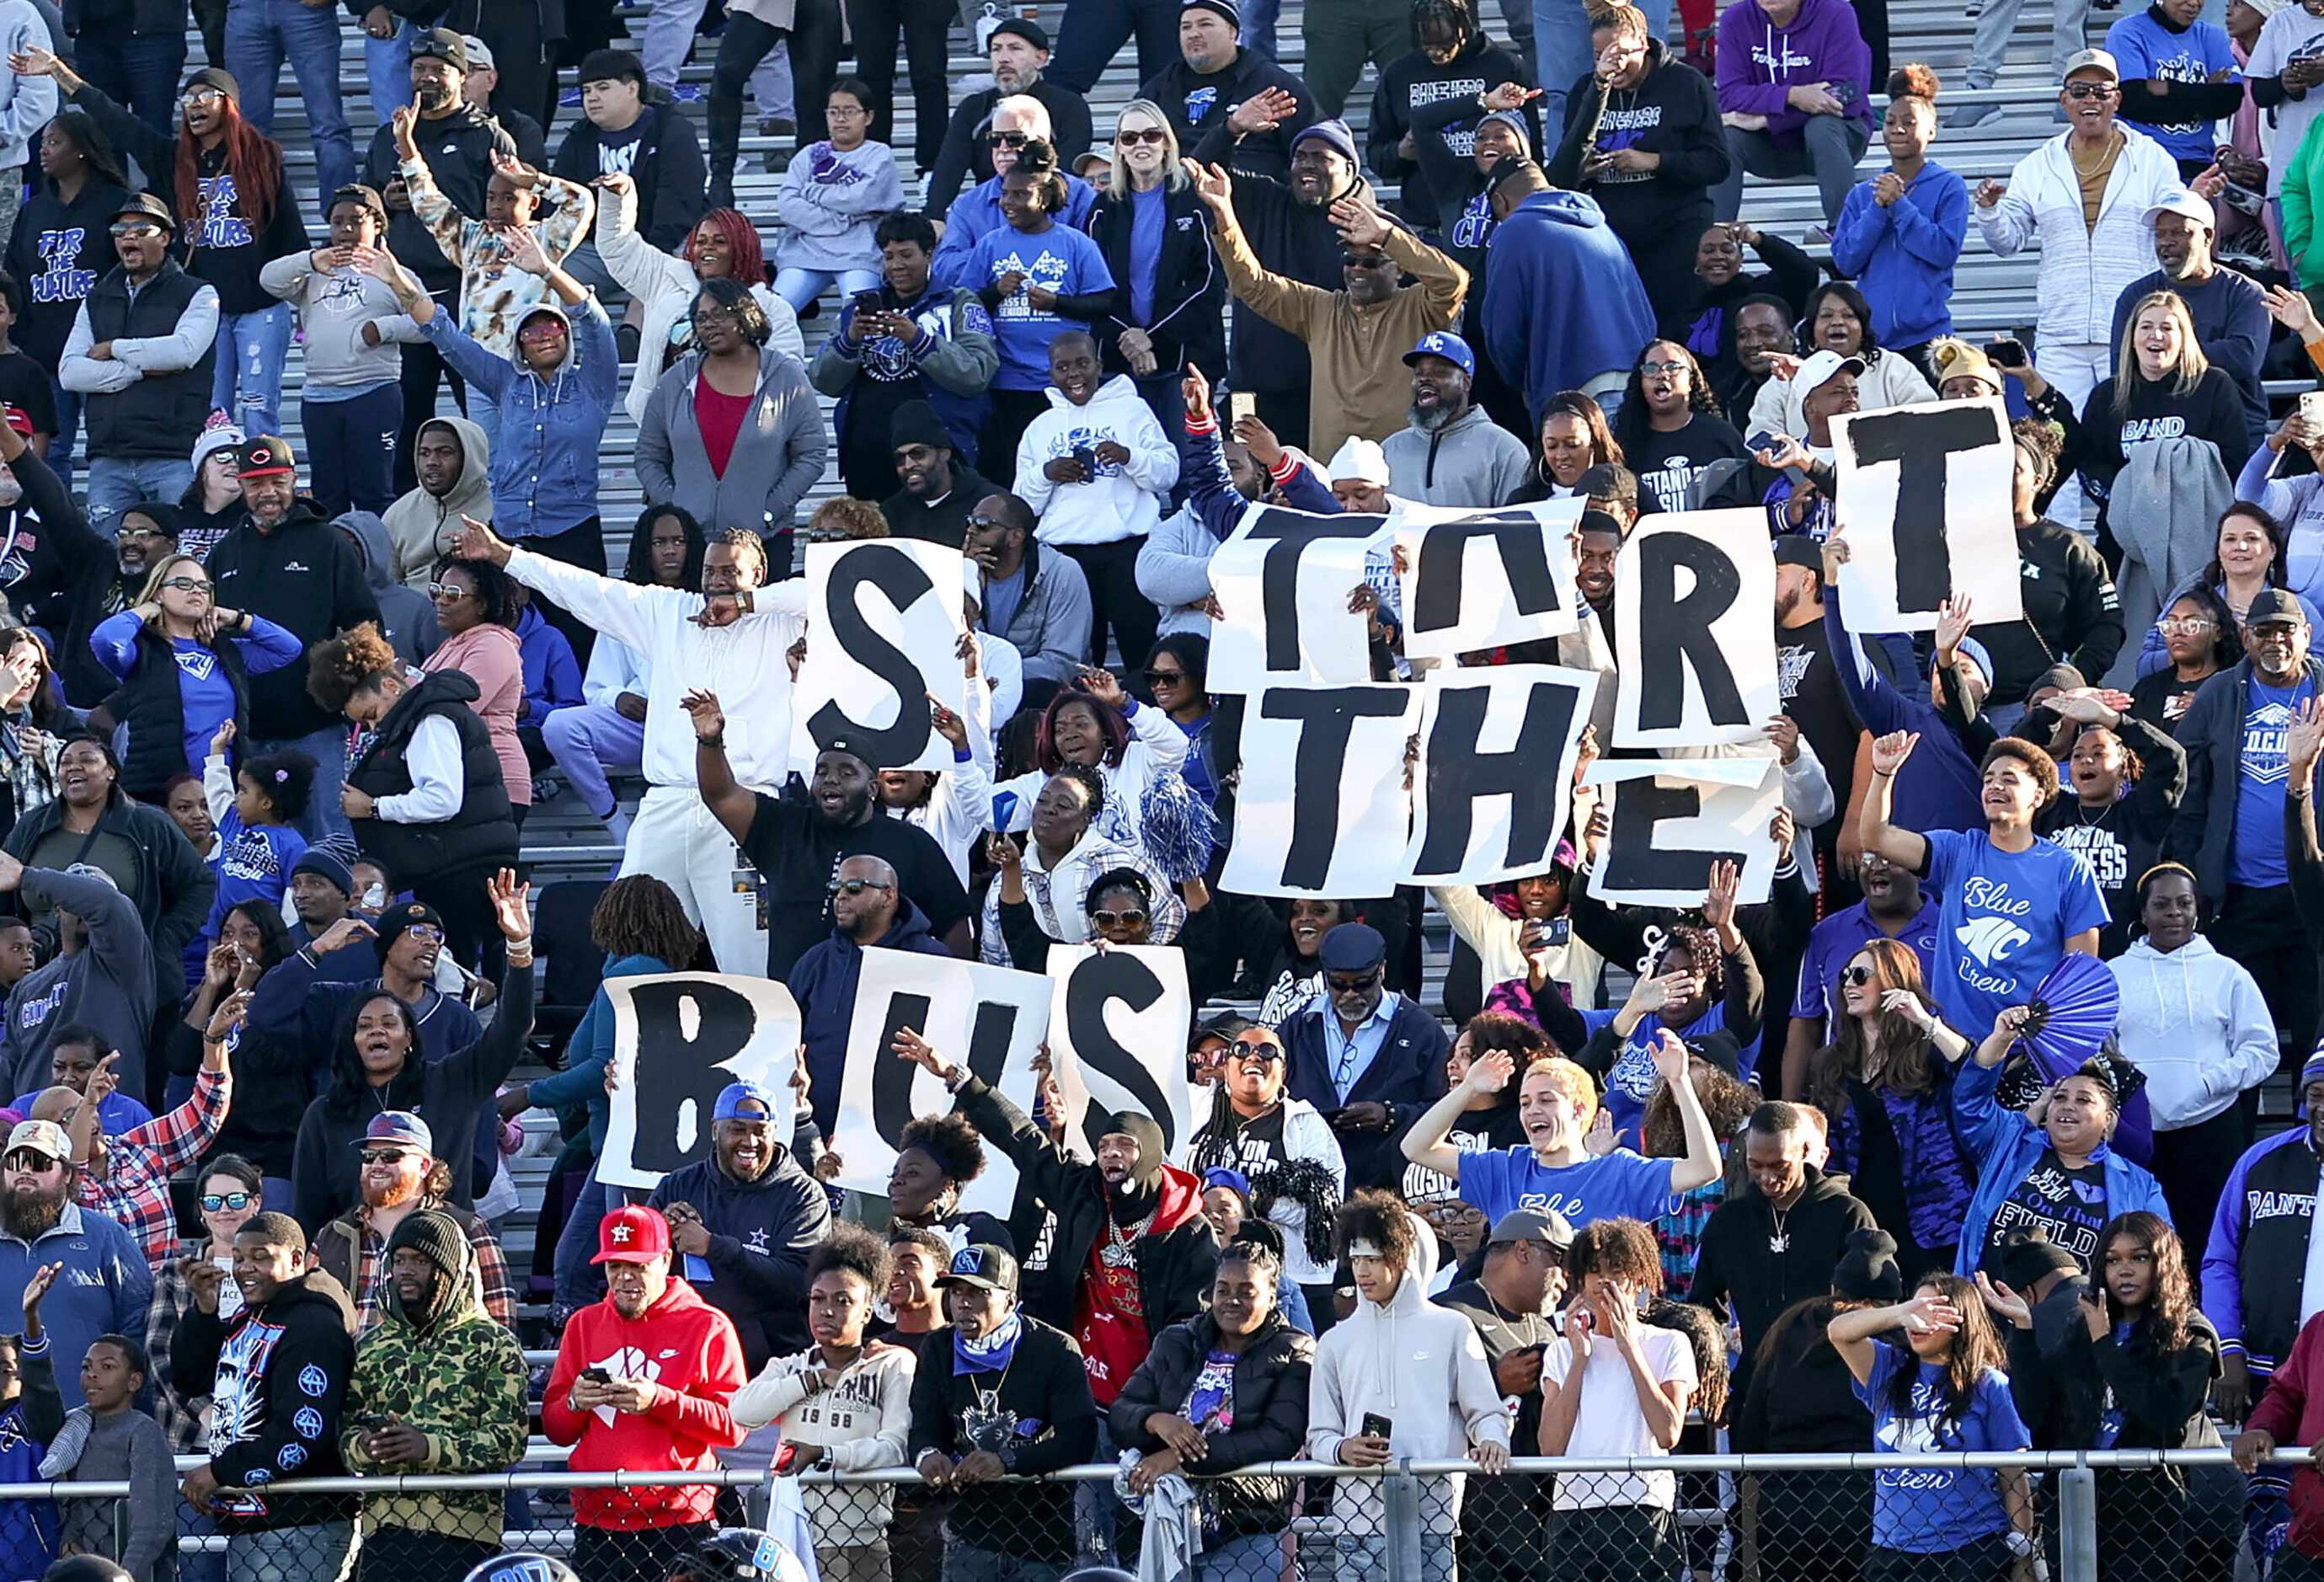 The North Crowley fans hold up "Start the bus" during the game against Allen in the 6A...